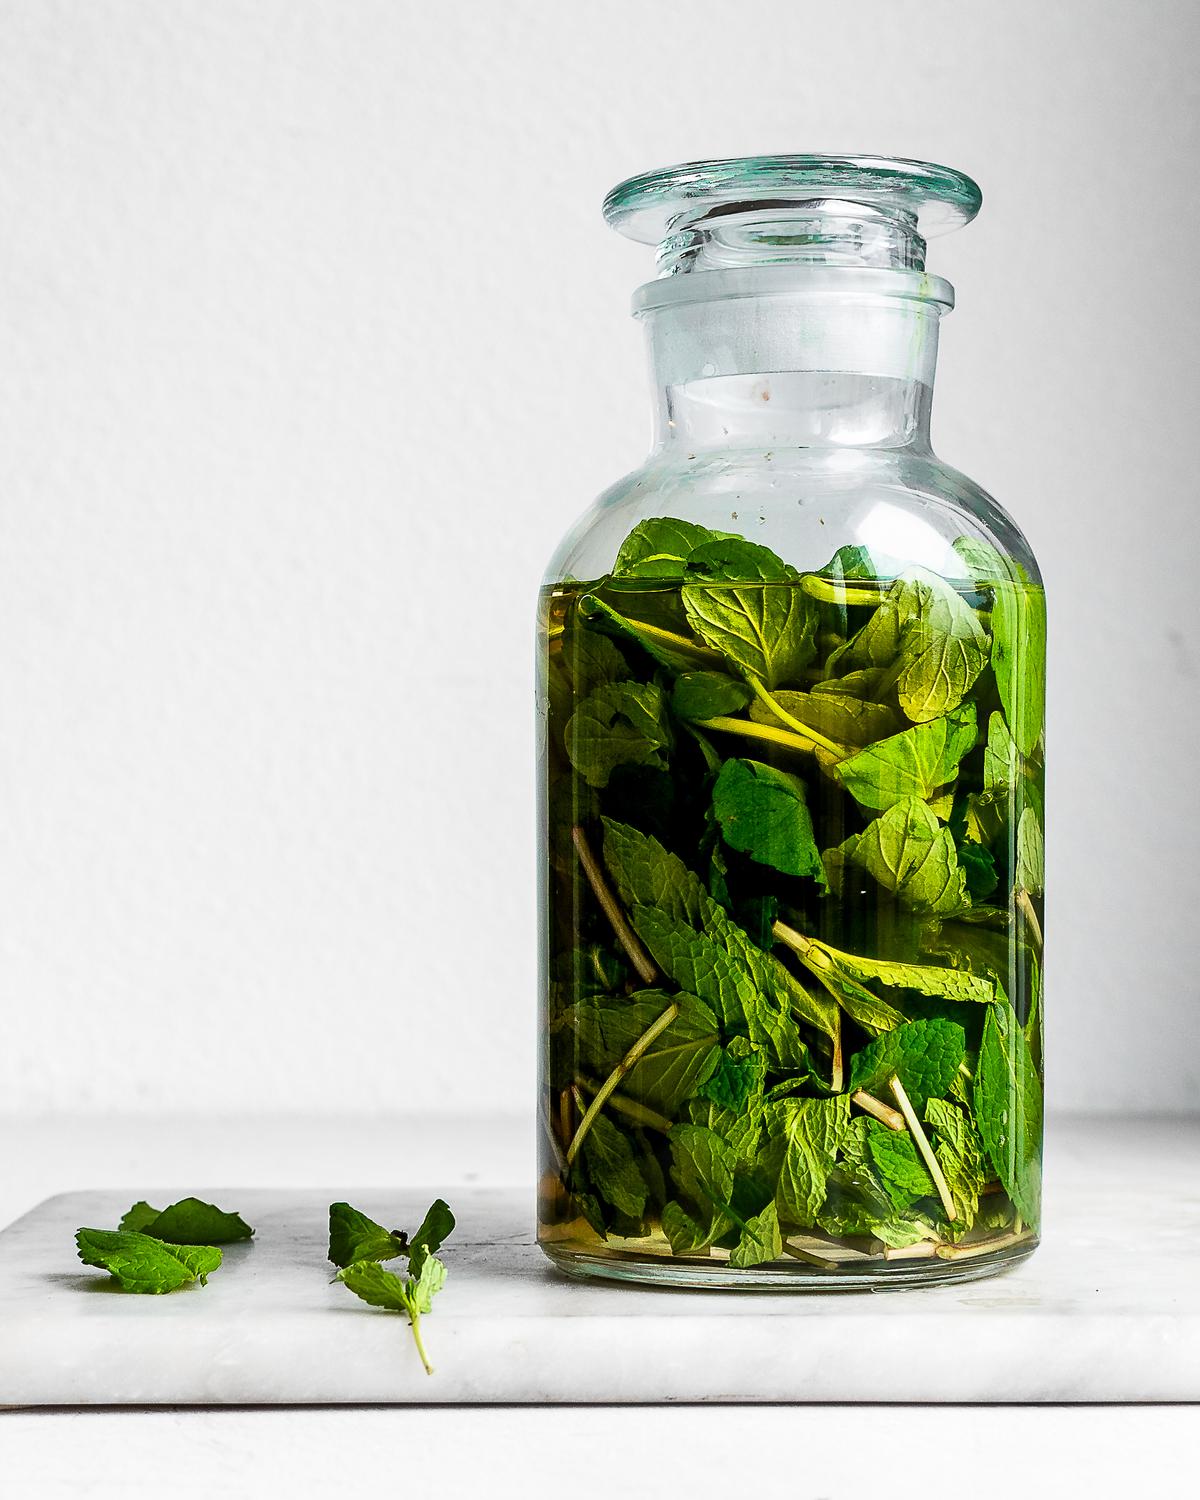 Deeply fragrant with a minty zip, mint vinegar is delicious drizzled over fresh watermelon or used in simple salads. (Jennifer McGruther)